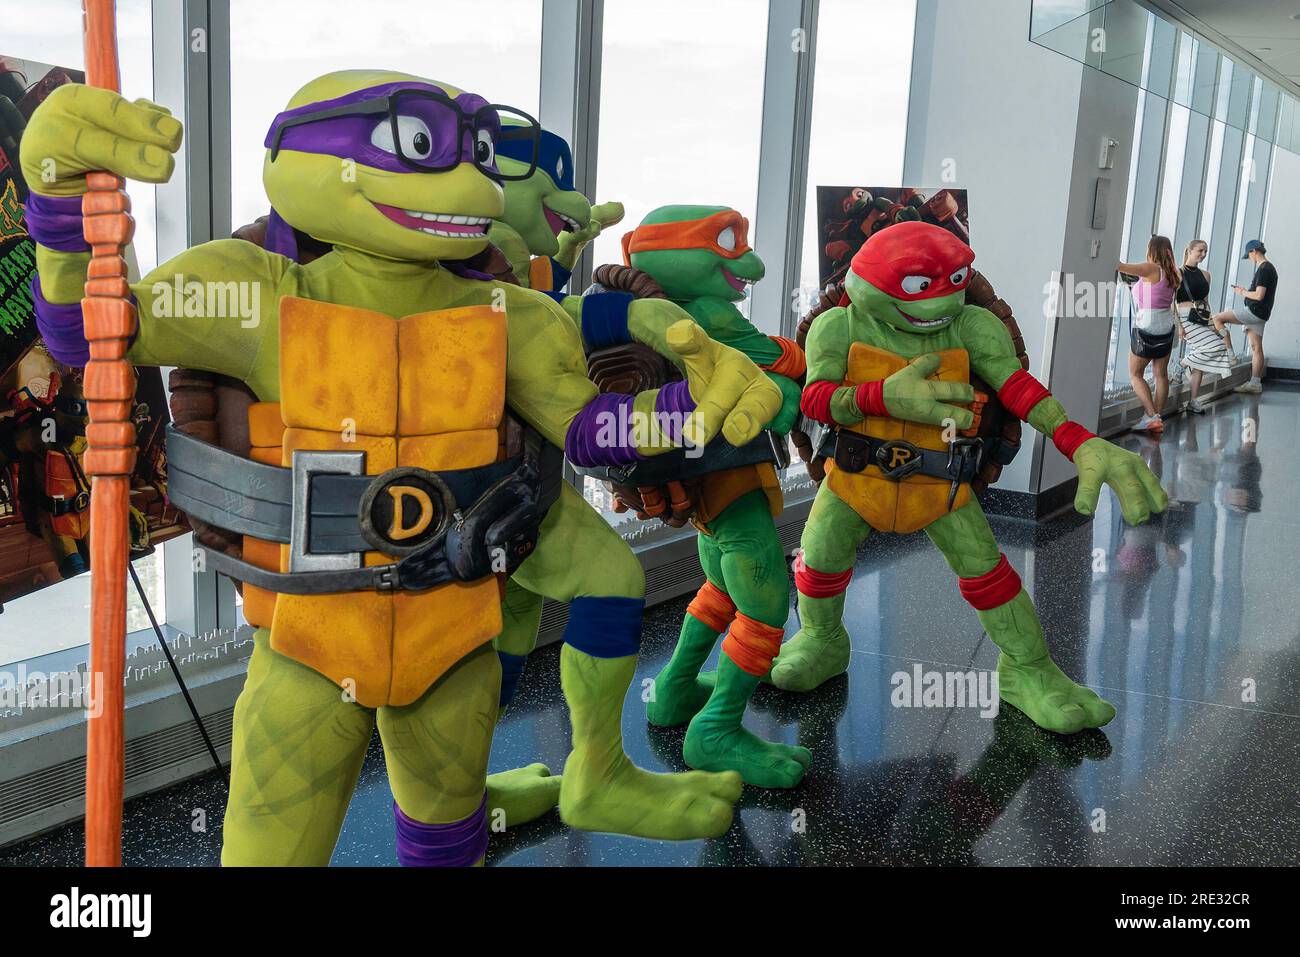 https://c8.alamy.com/comp/2RE32CR/new-york-new-york-usa-24th-july-2023-teenage-mutant-ninja-turtles-characters-visit-one-world-observatory-in-new-york-and-pose-with-visitors-in-anticipation-of-release-of-teenage-mutant-ninja-turtles-mutant-mayhem-blockbuster-movie-is-scheduled-for-release-on-august-2-2023-credit-image-lev-radinpacific-press-via-zuma-press-wire-editorial-usage-only!-not-for-commercial-usage!-credit-zuma-press-incalamy-live-news-2RE32CR.jpg